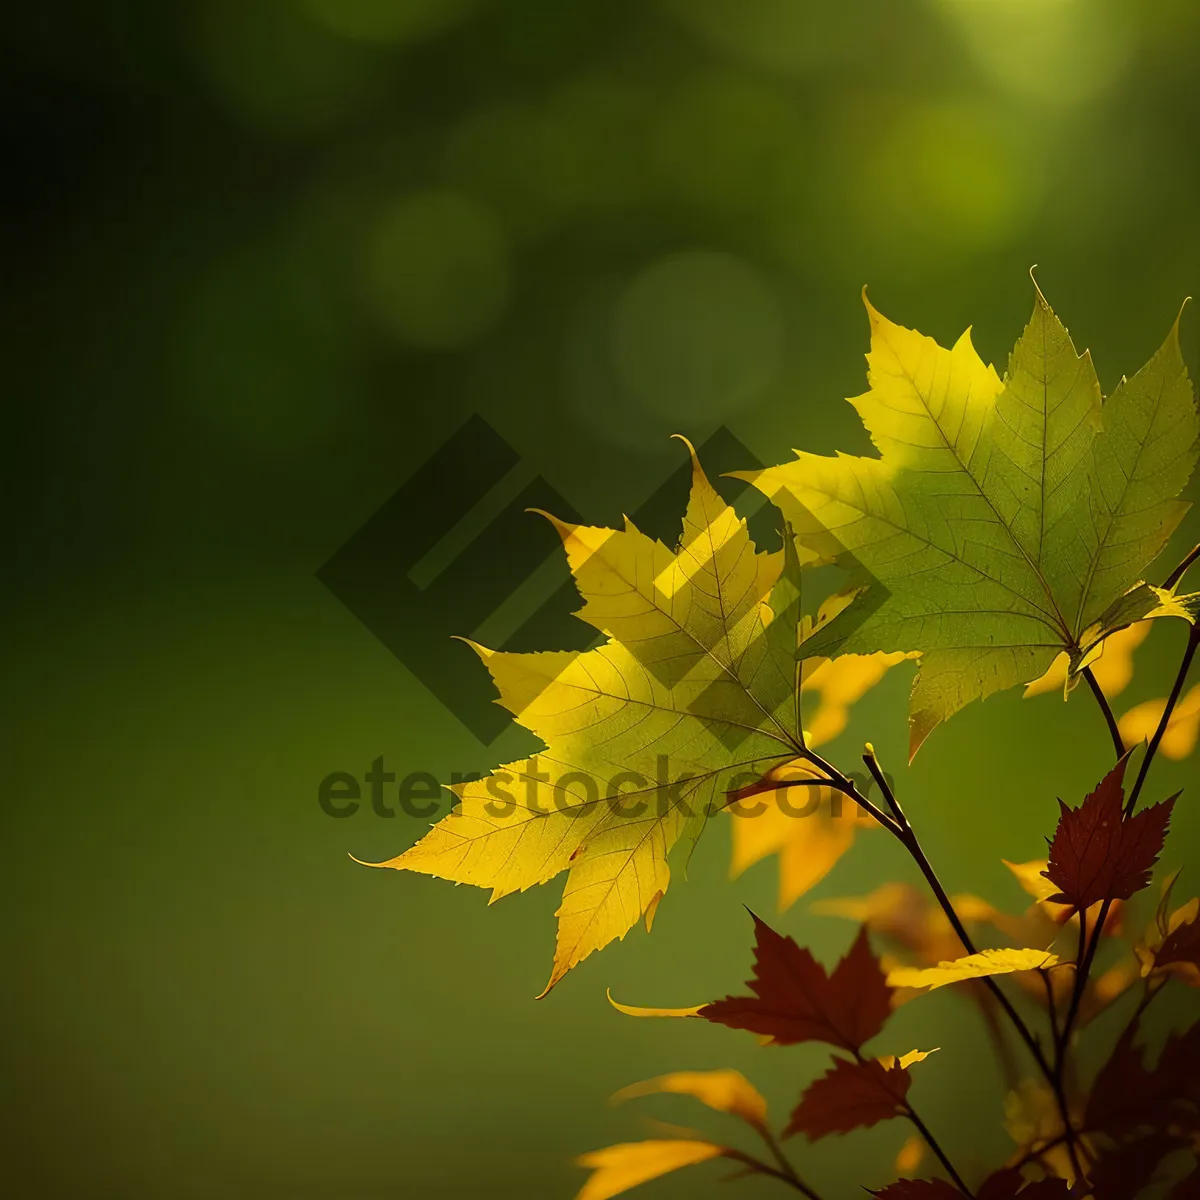 Picture of Vibrant Maple Leaf in Autumn